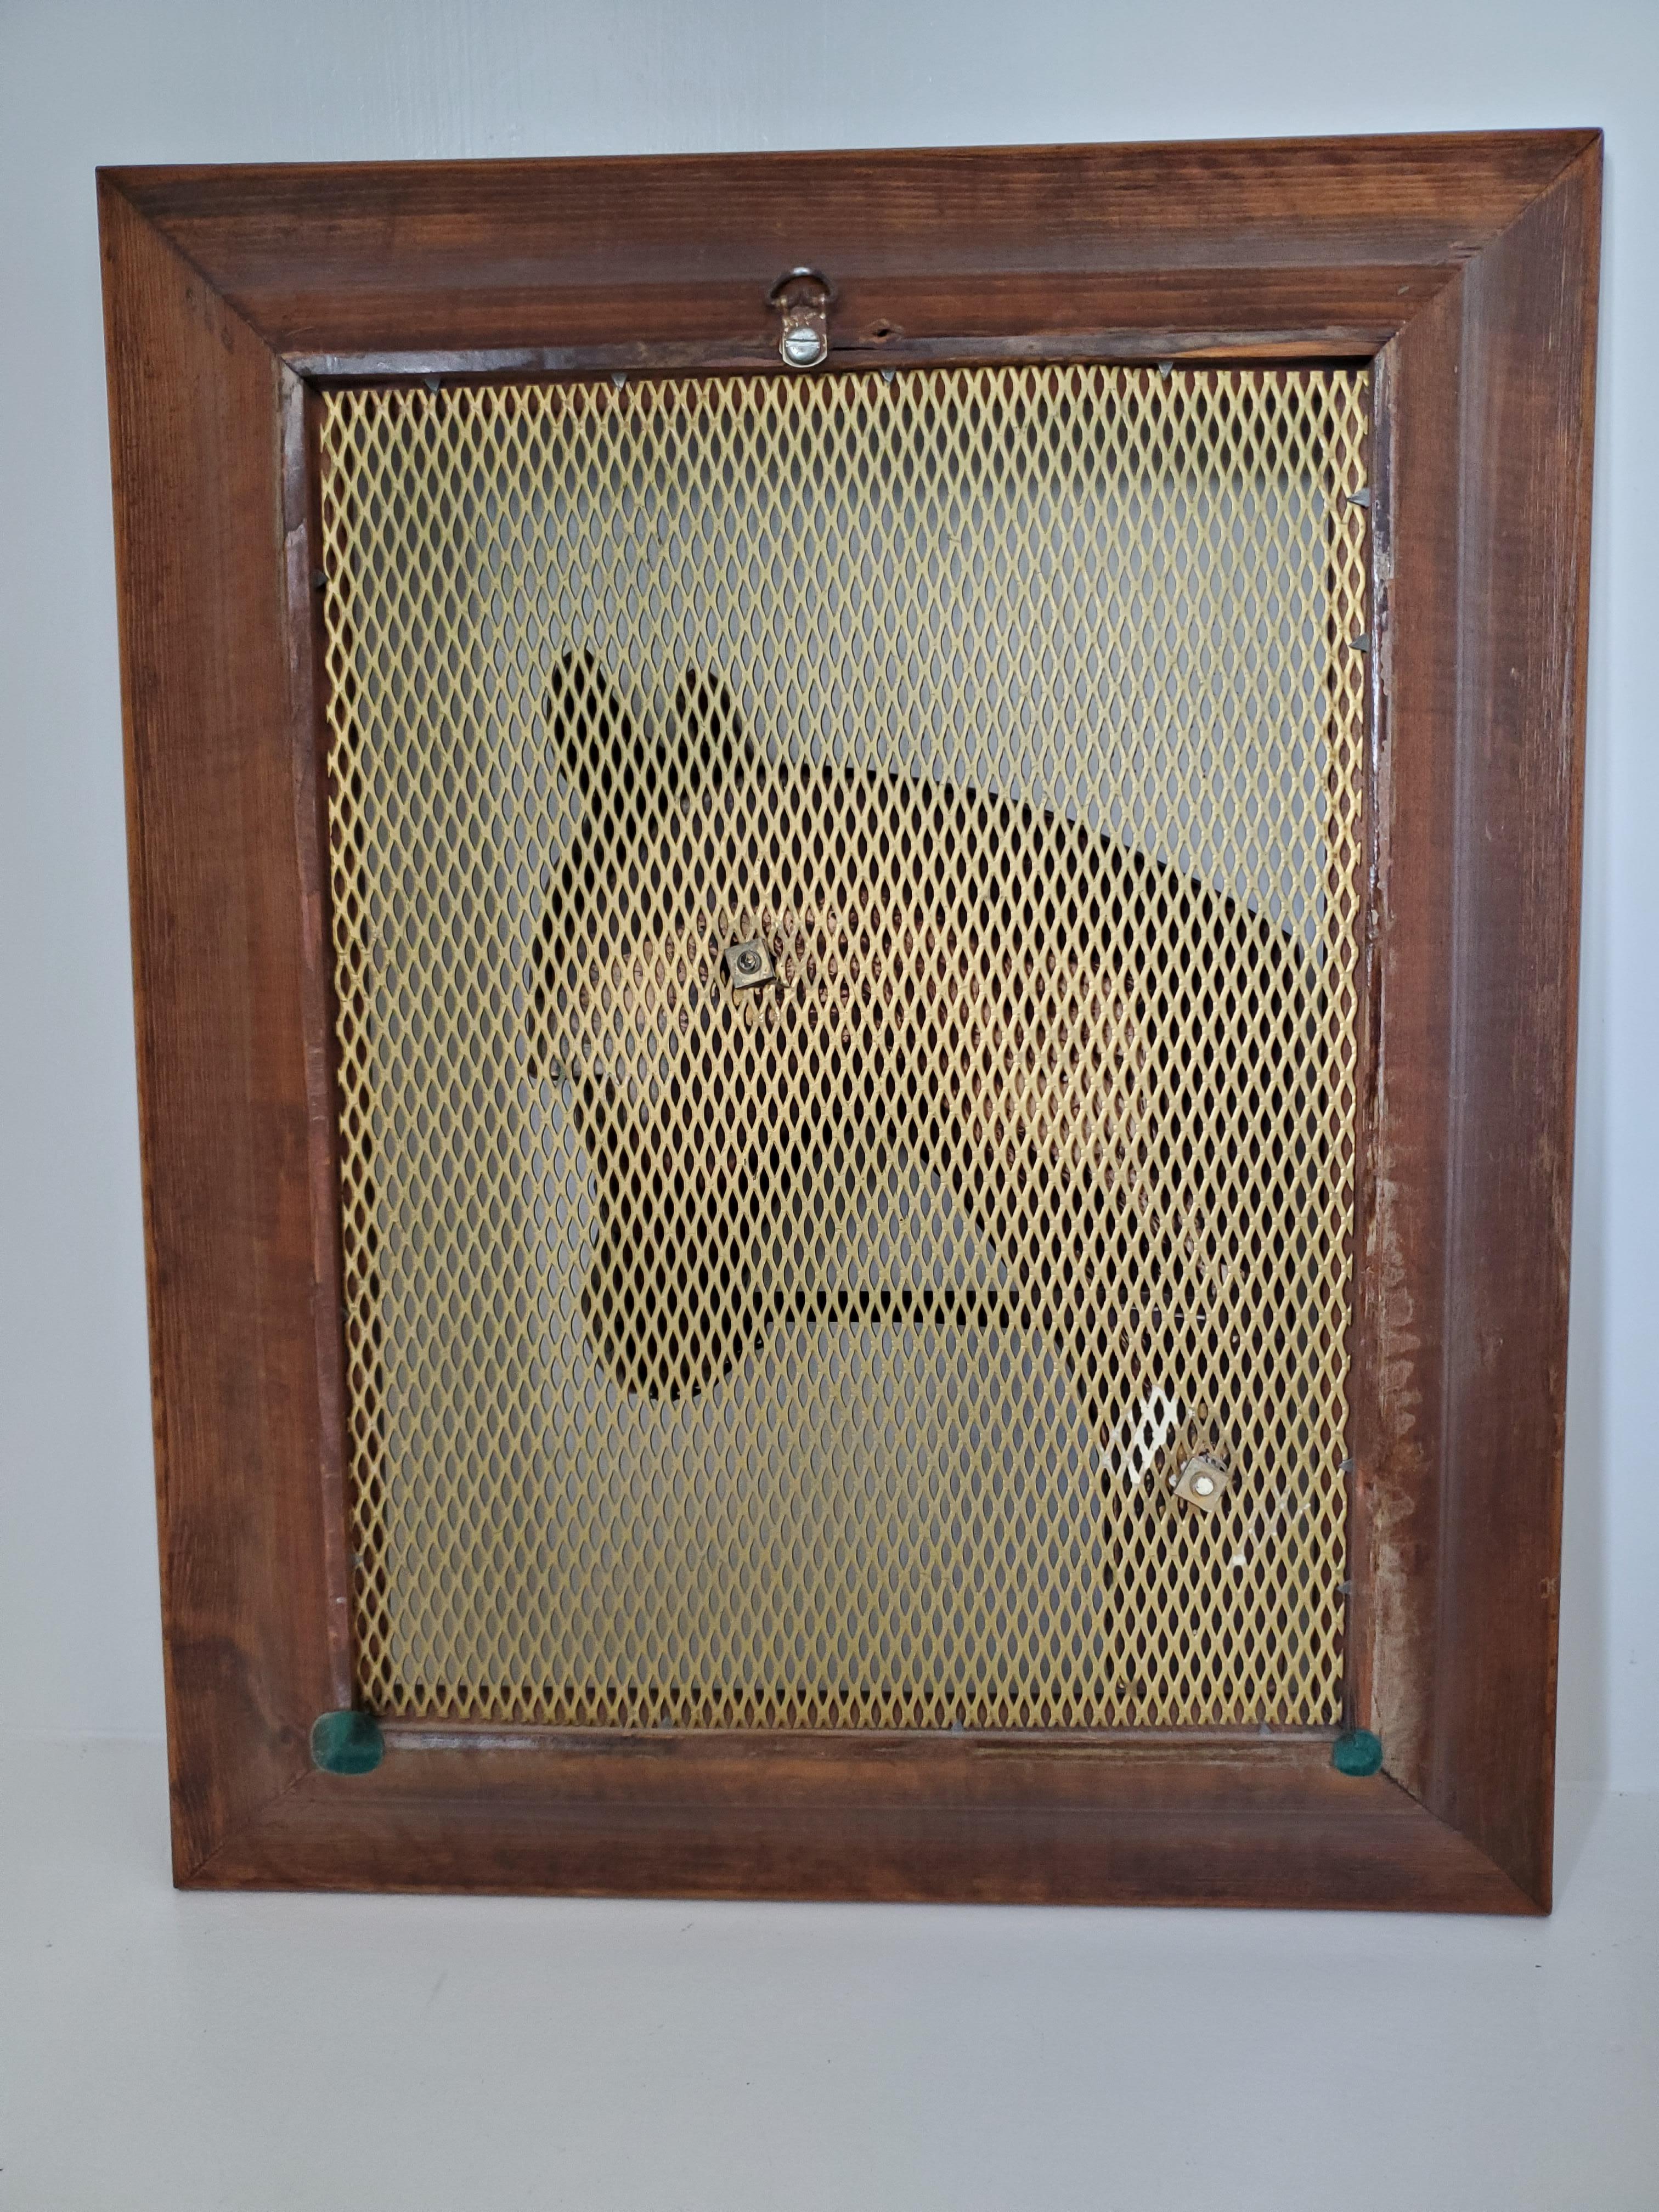 Antique Horse Sculpture  Framed Copper Horse Head in Relief In Good Condition For Sale In Nova Scotia, NS